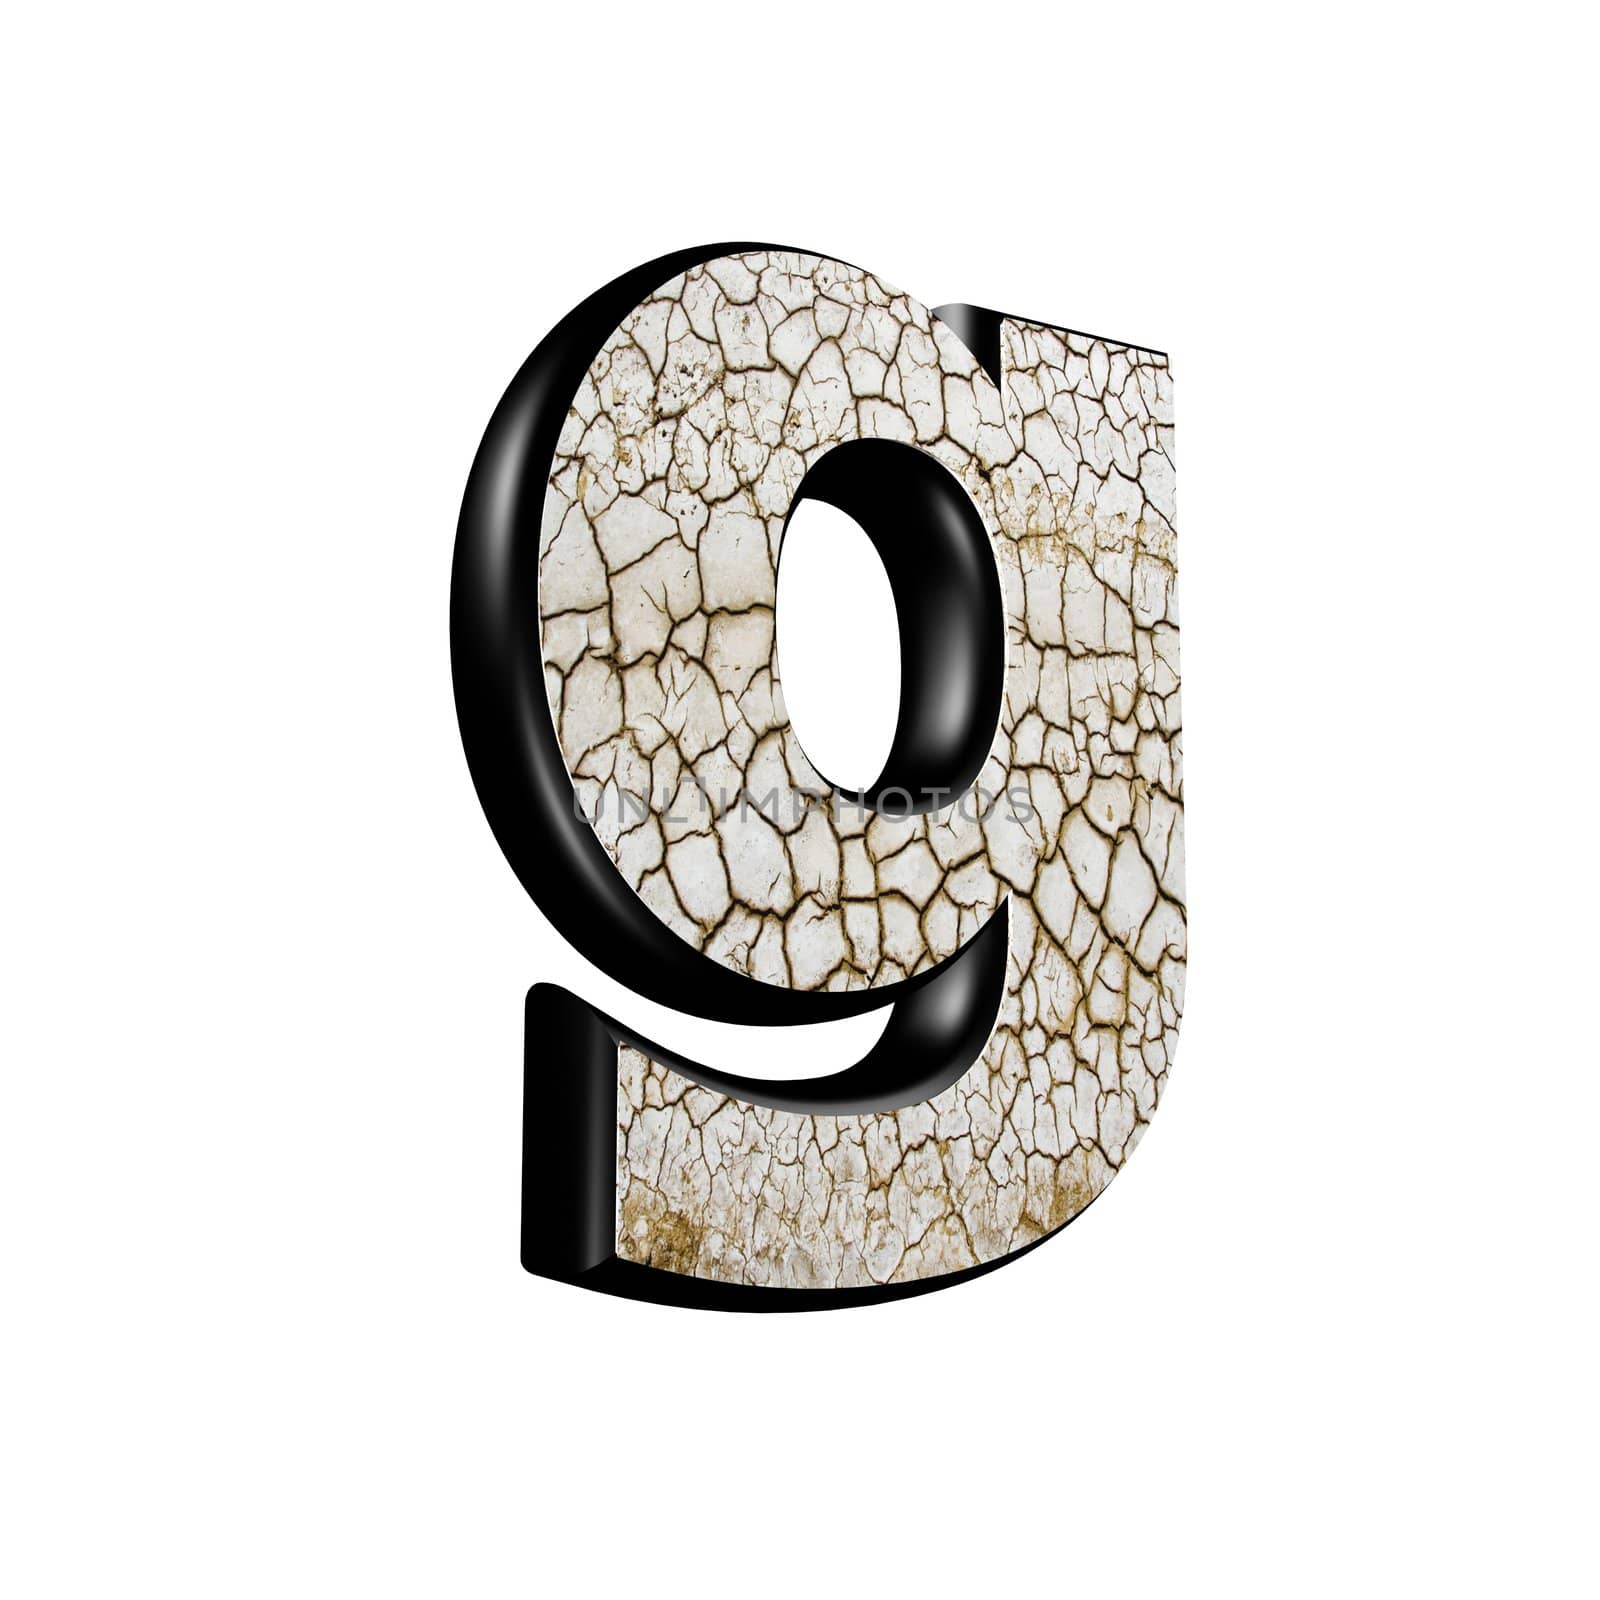 abstract 3d letter with dry ground texture - G by chrisroll